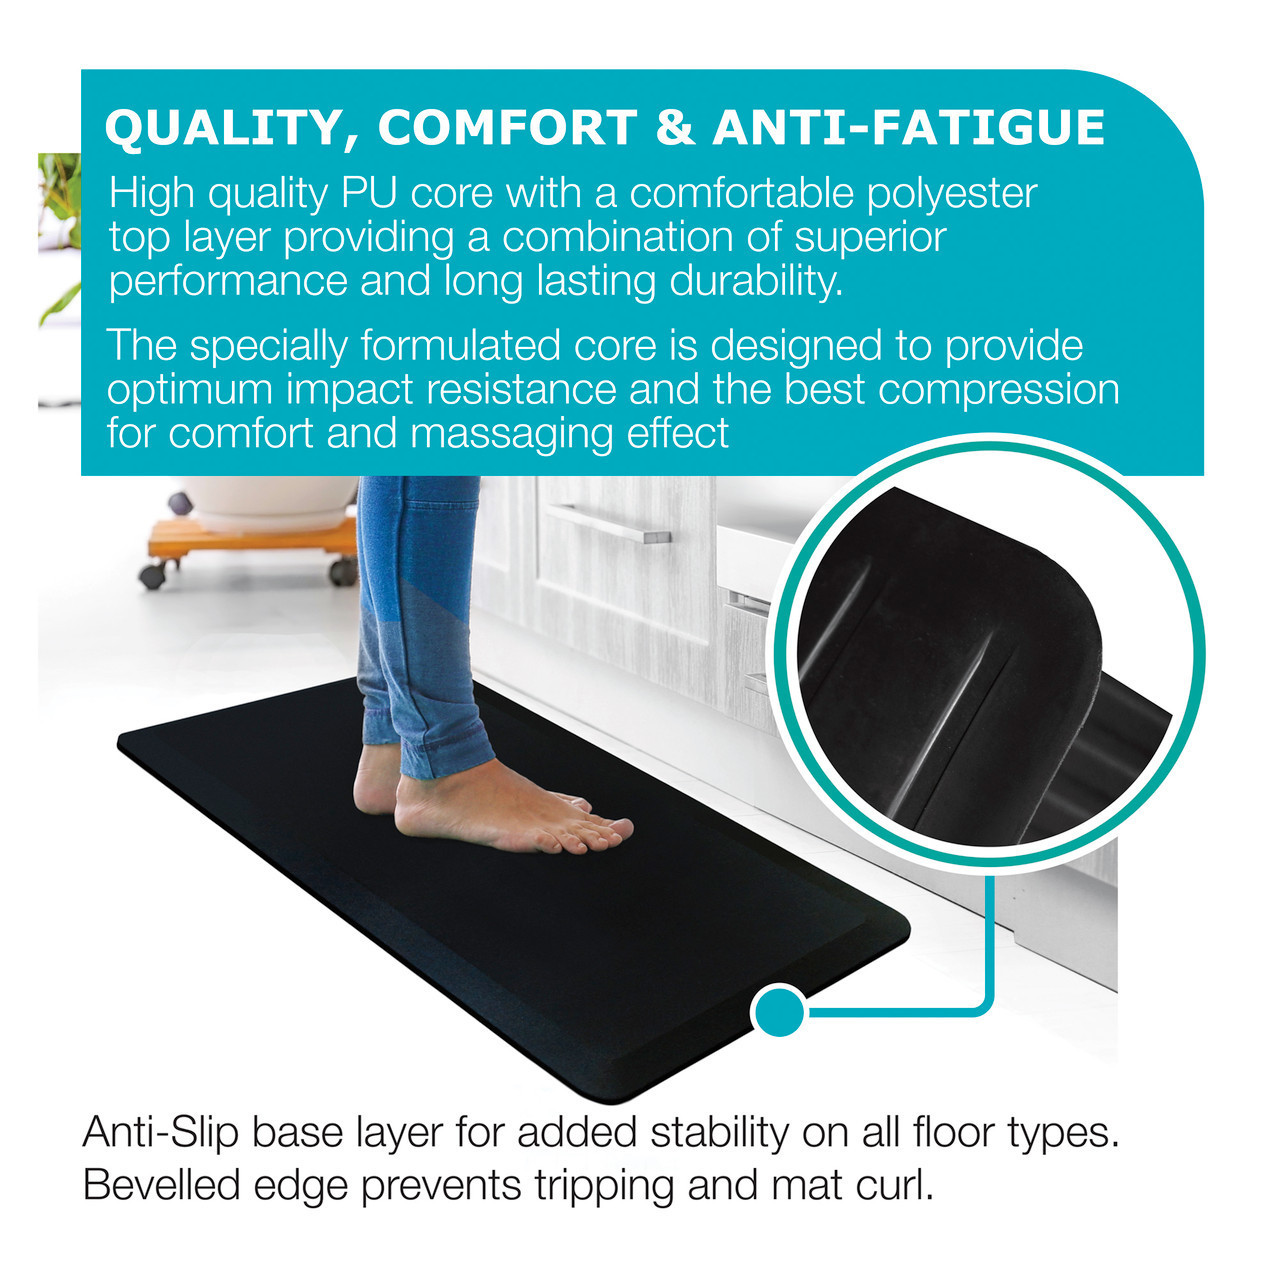 https://cdn11.bigcommerce.com/s-fjwps1jbkv/images/stencil/1280x1280/products/328/3500/ultralux-premium-anti-fatigue-floor-comfort-mat-or-durable-ergonomic-multi-purpose-non-slip-standing-support-pad-or-34-thick-or-black__20783.1688992241.jpg?c=2?imbypass=on